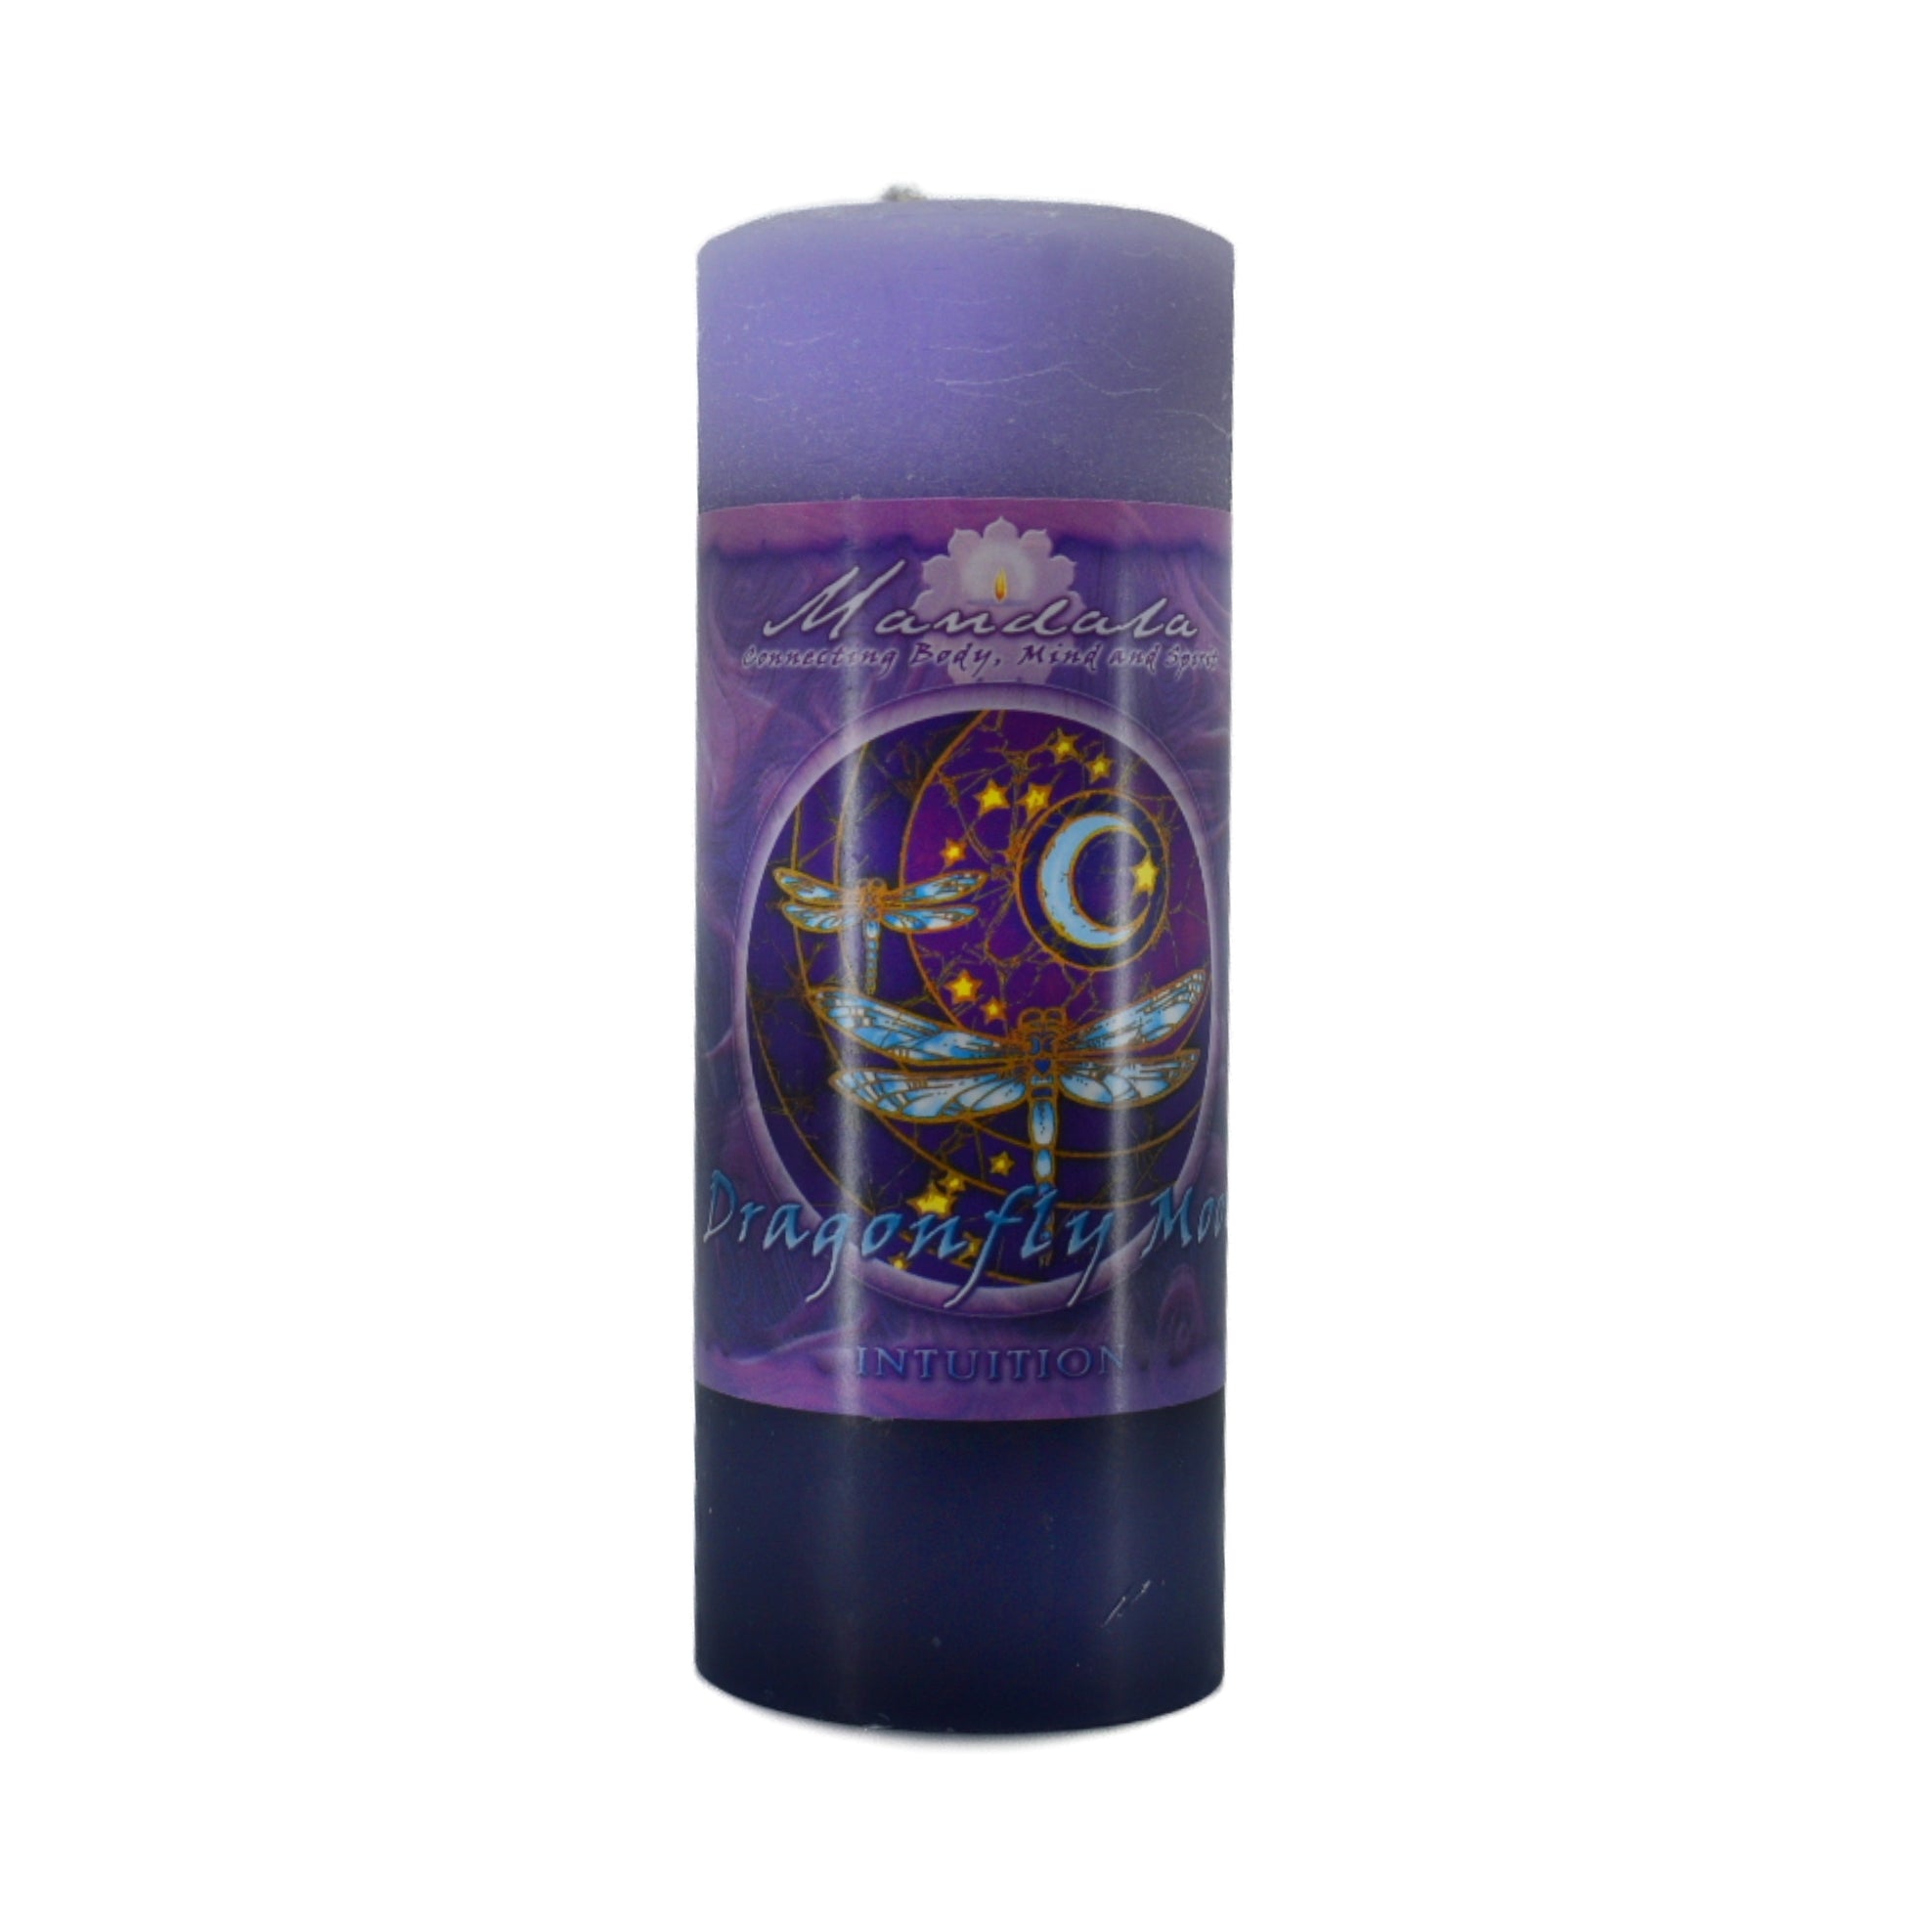 Intuition Mandala Candle.  Dragonfly and moon.  Burn the candle to enhance intuition, dream visions, imagination, direction and purpose.  Candle is scented with rock rose flower, white peony and violet.